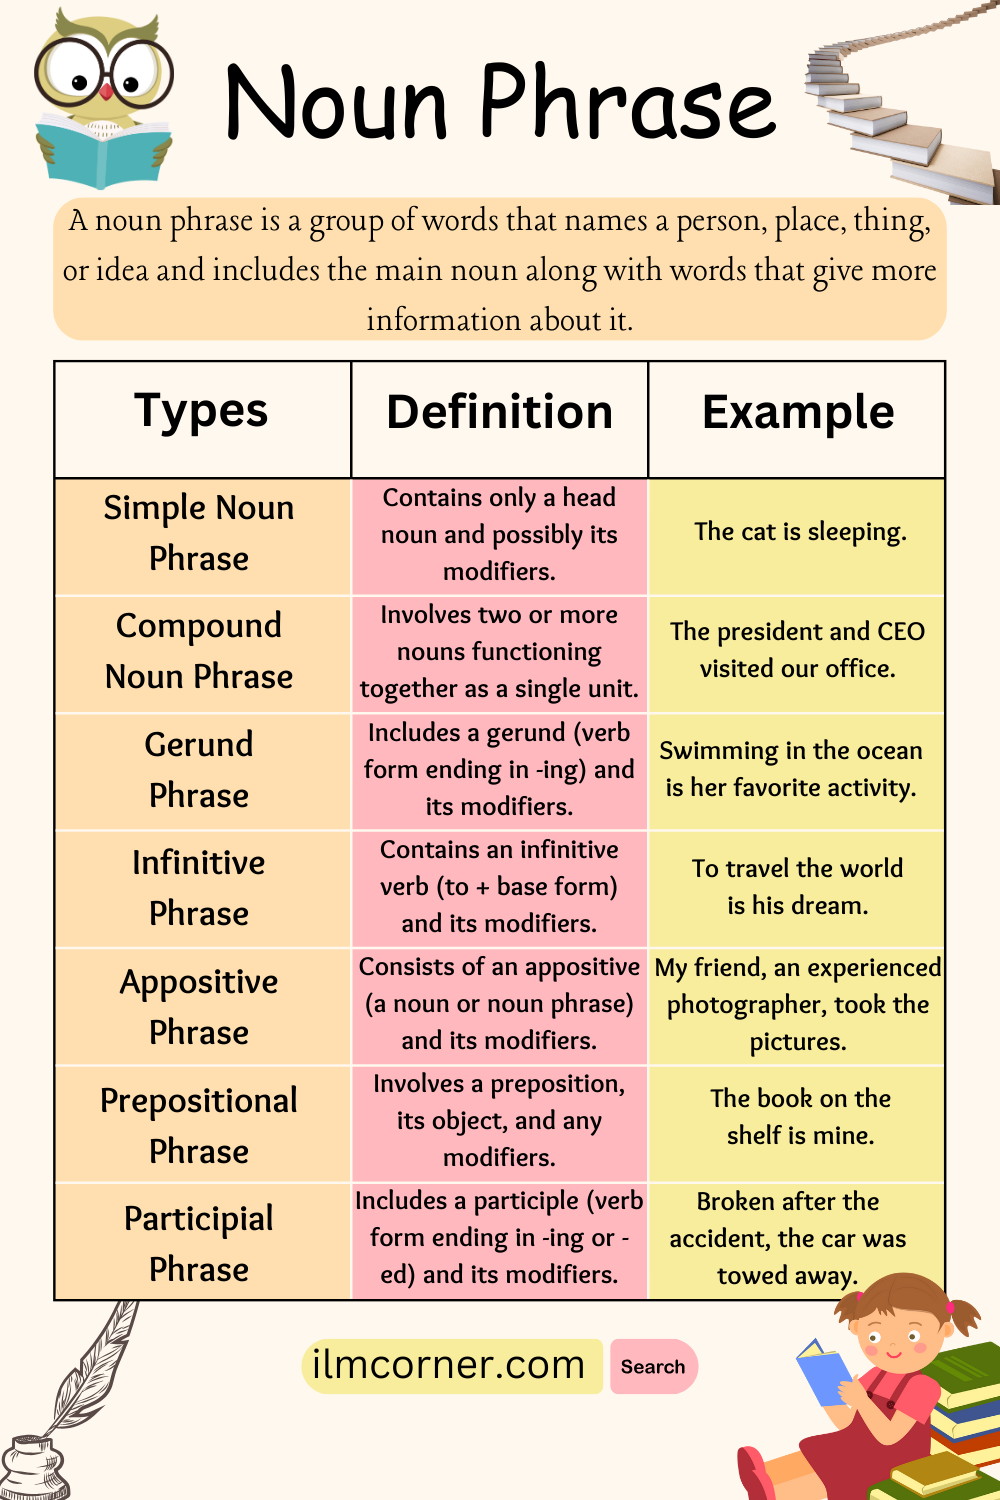 Noun Phrase, Definition, Usage and Examples